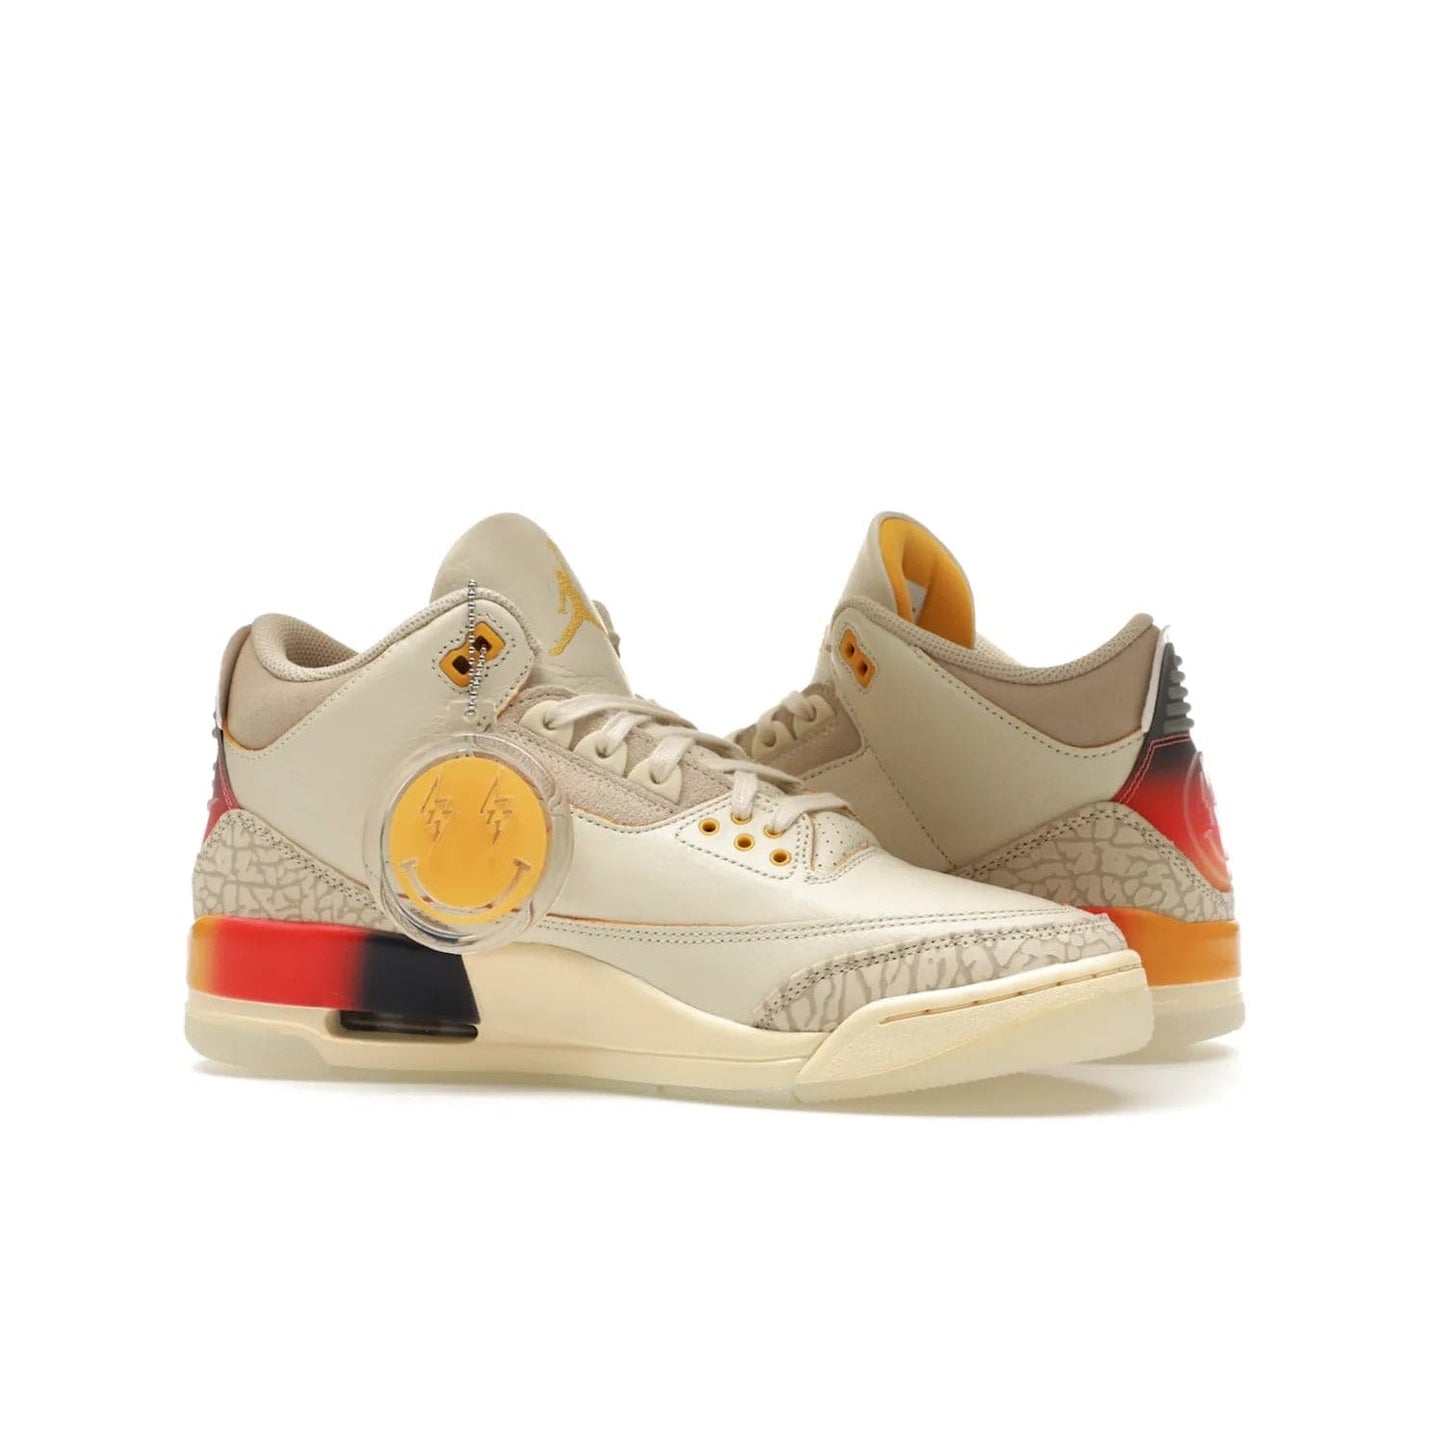 Jordan 3 Retro SP J Balvin Medellín Sunset - Image 21 - Only at www.BallersClubKickz.com - J Balvin x Jordan 3 Retro SP: Celebrate the joy of life with a colorful, homage to the electrifying reggaeton culture and iconic Jordan 3. Limited edition, Sept. 23. $250.